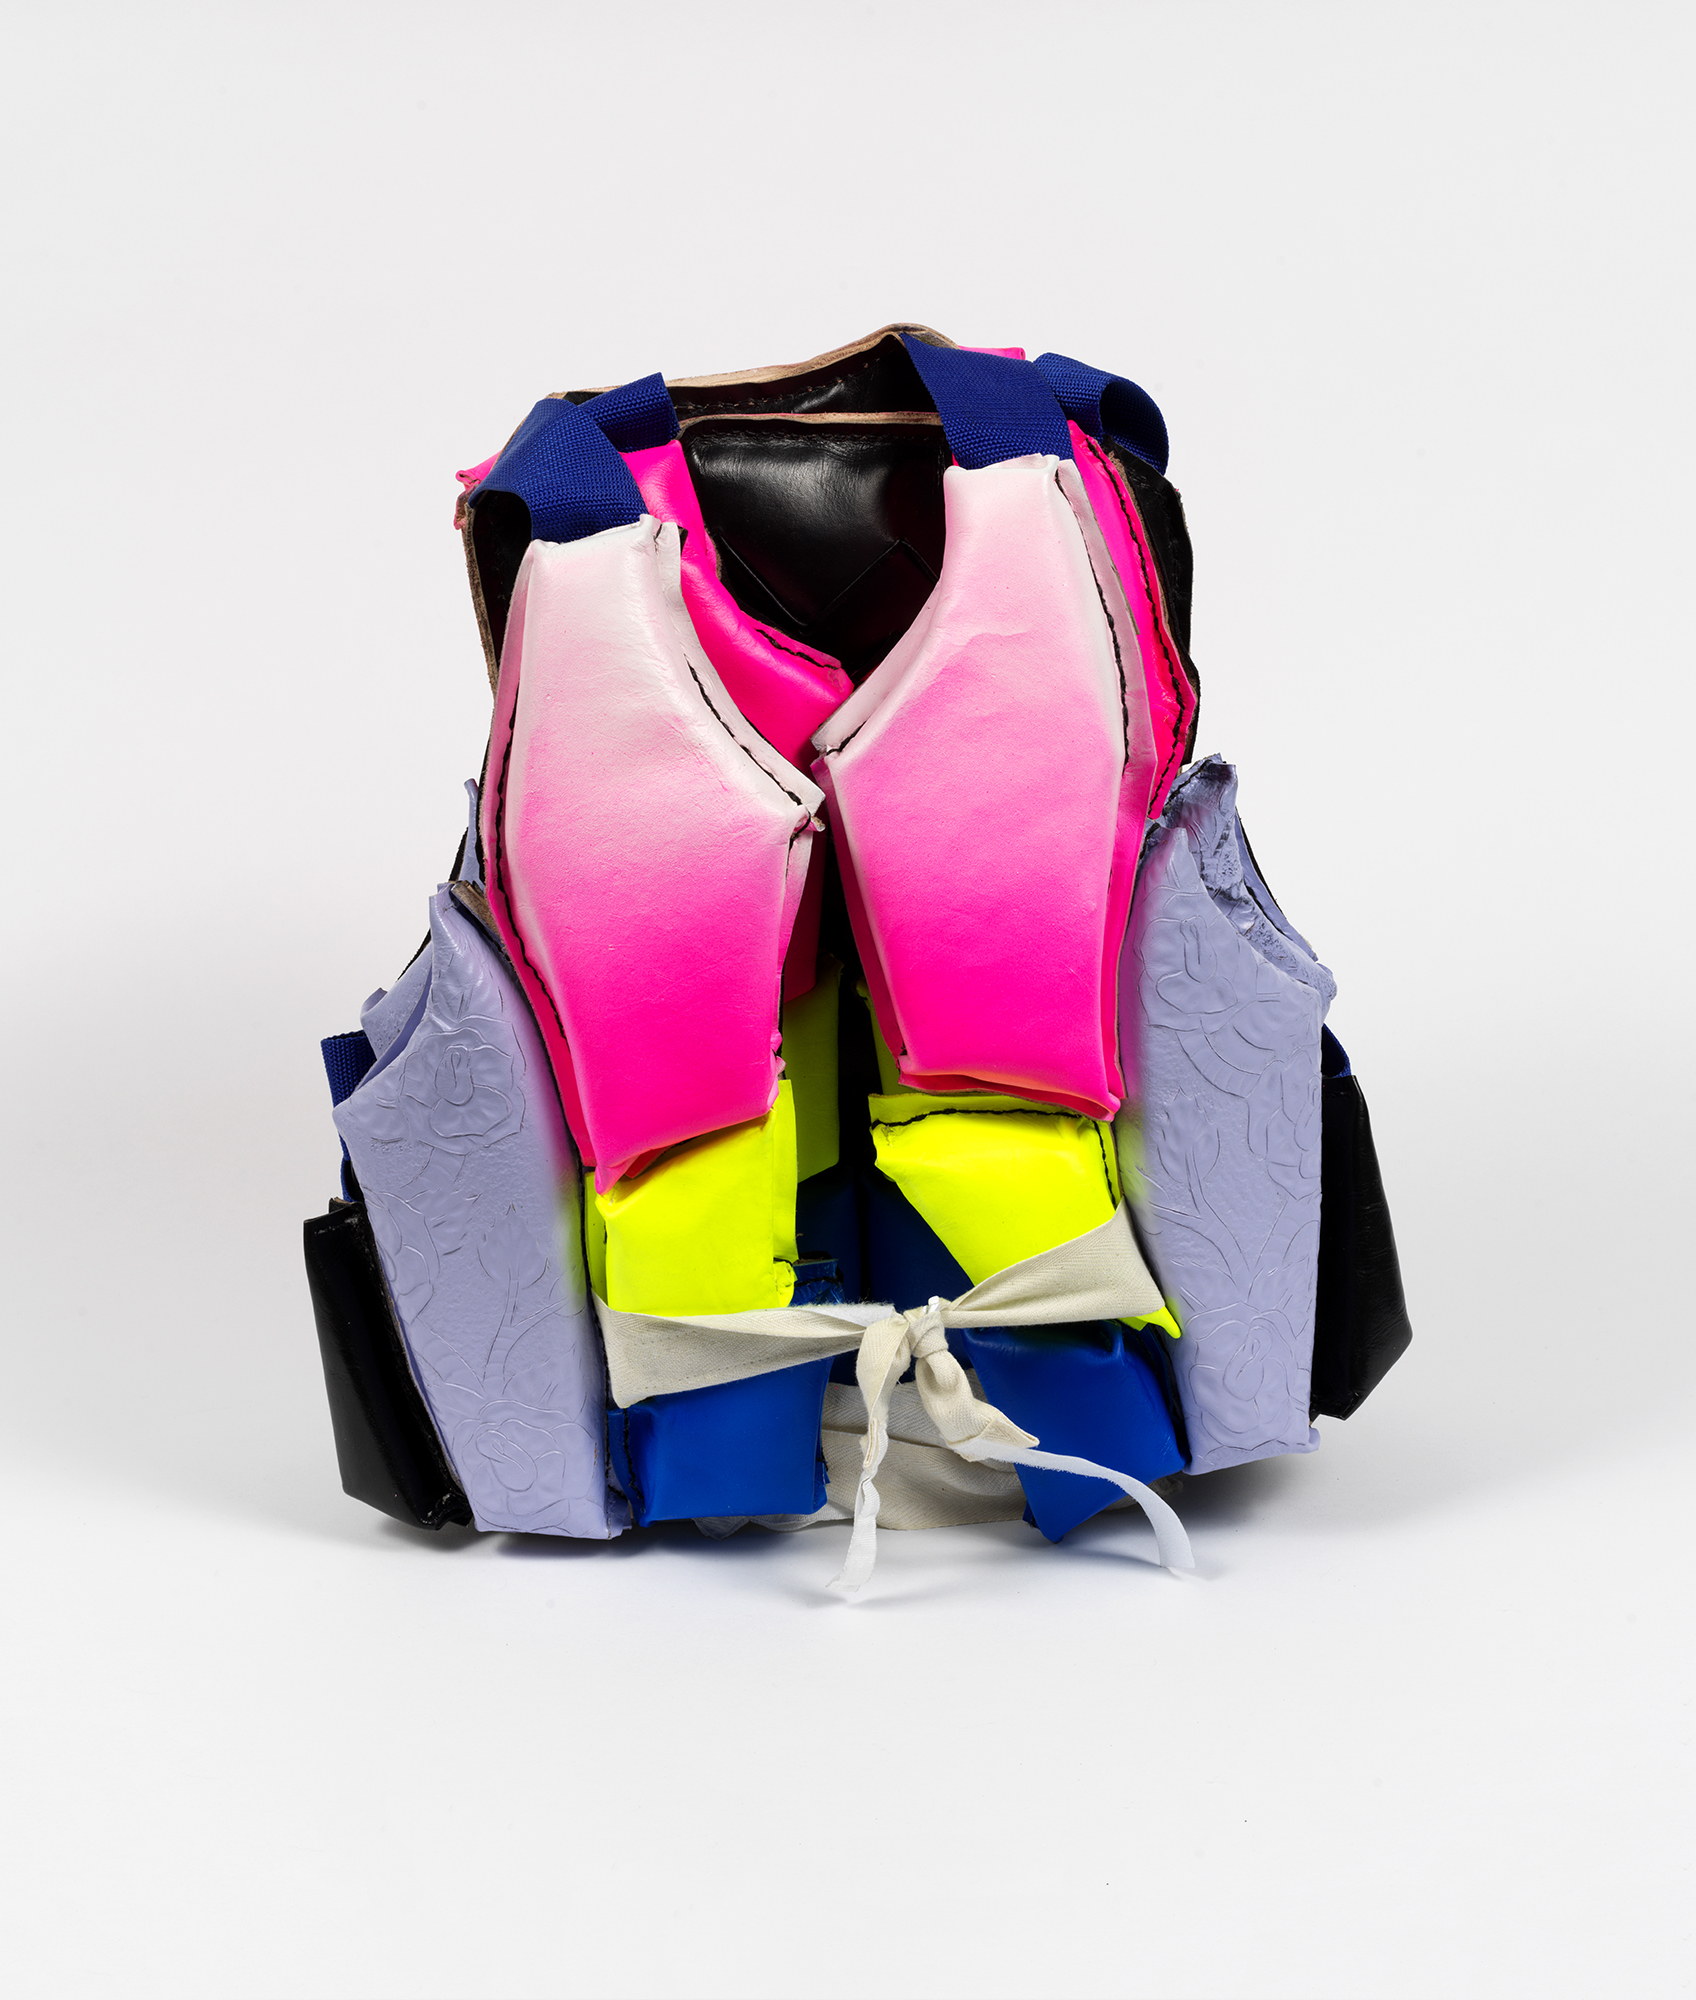 Betsy Odom, Life Vest, 2018. Leather, paint, strapping, fabric. Courtesy of the artist. Photo: Tom Van Eynde